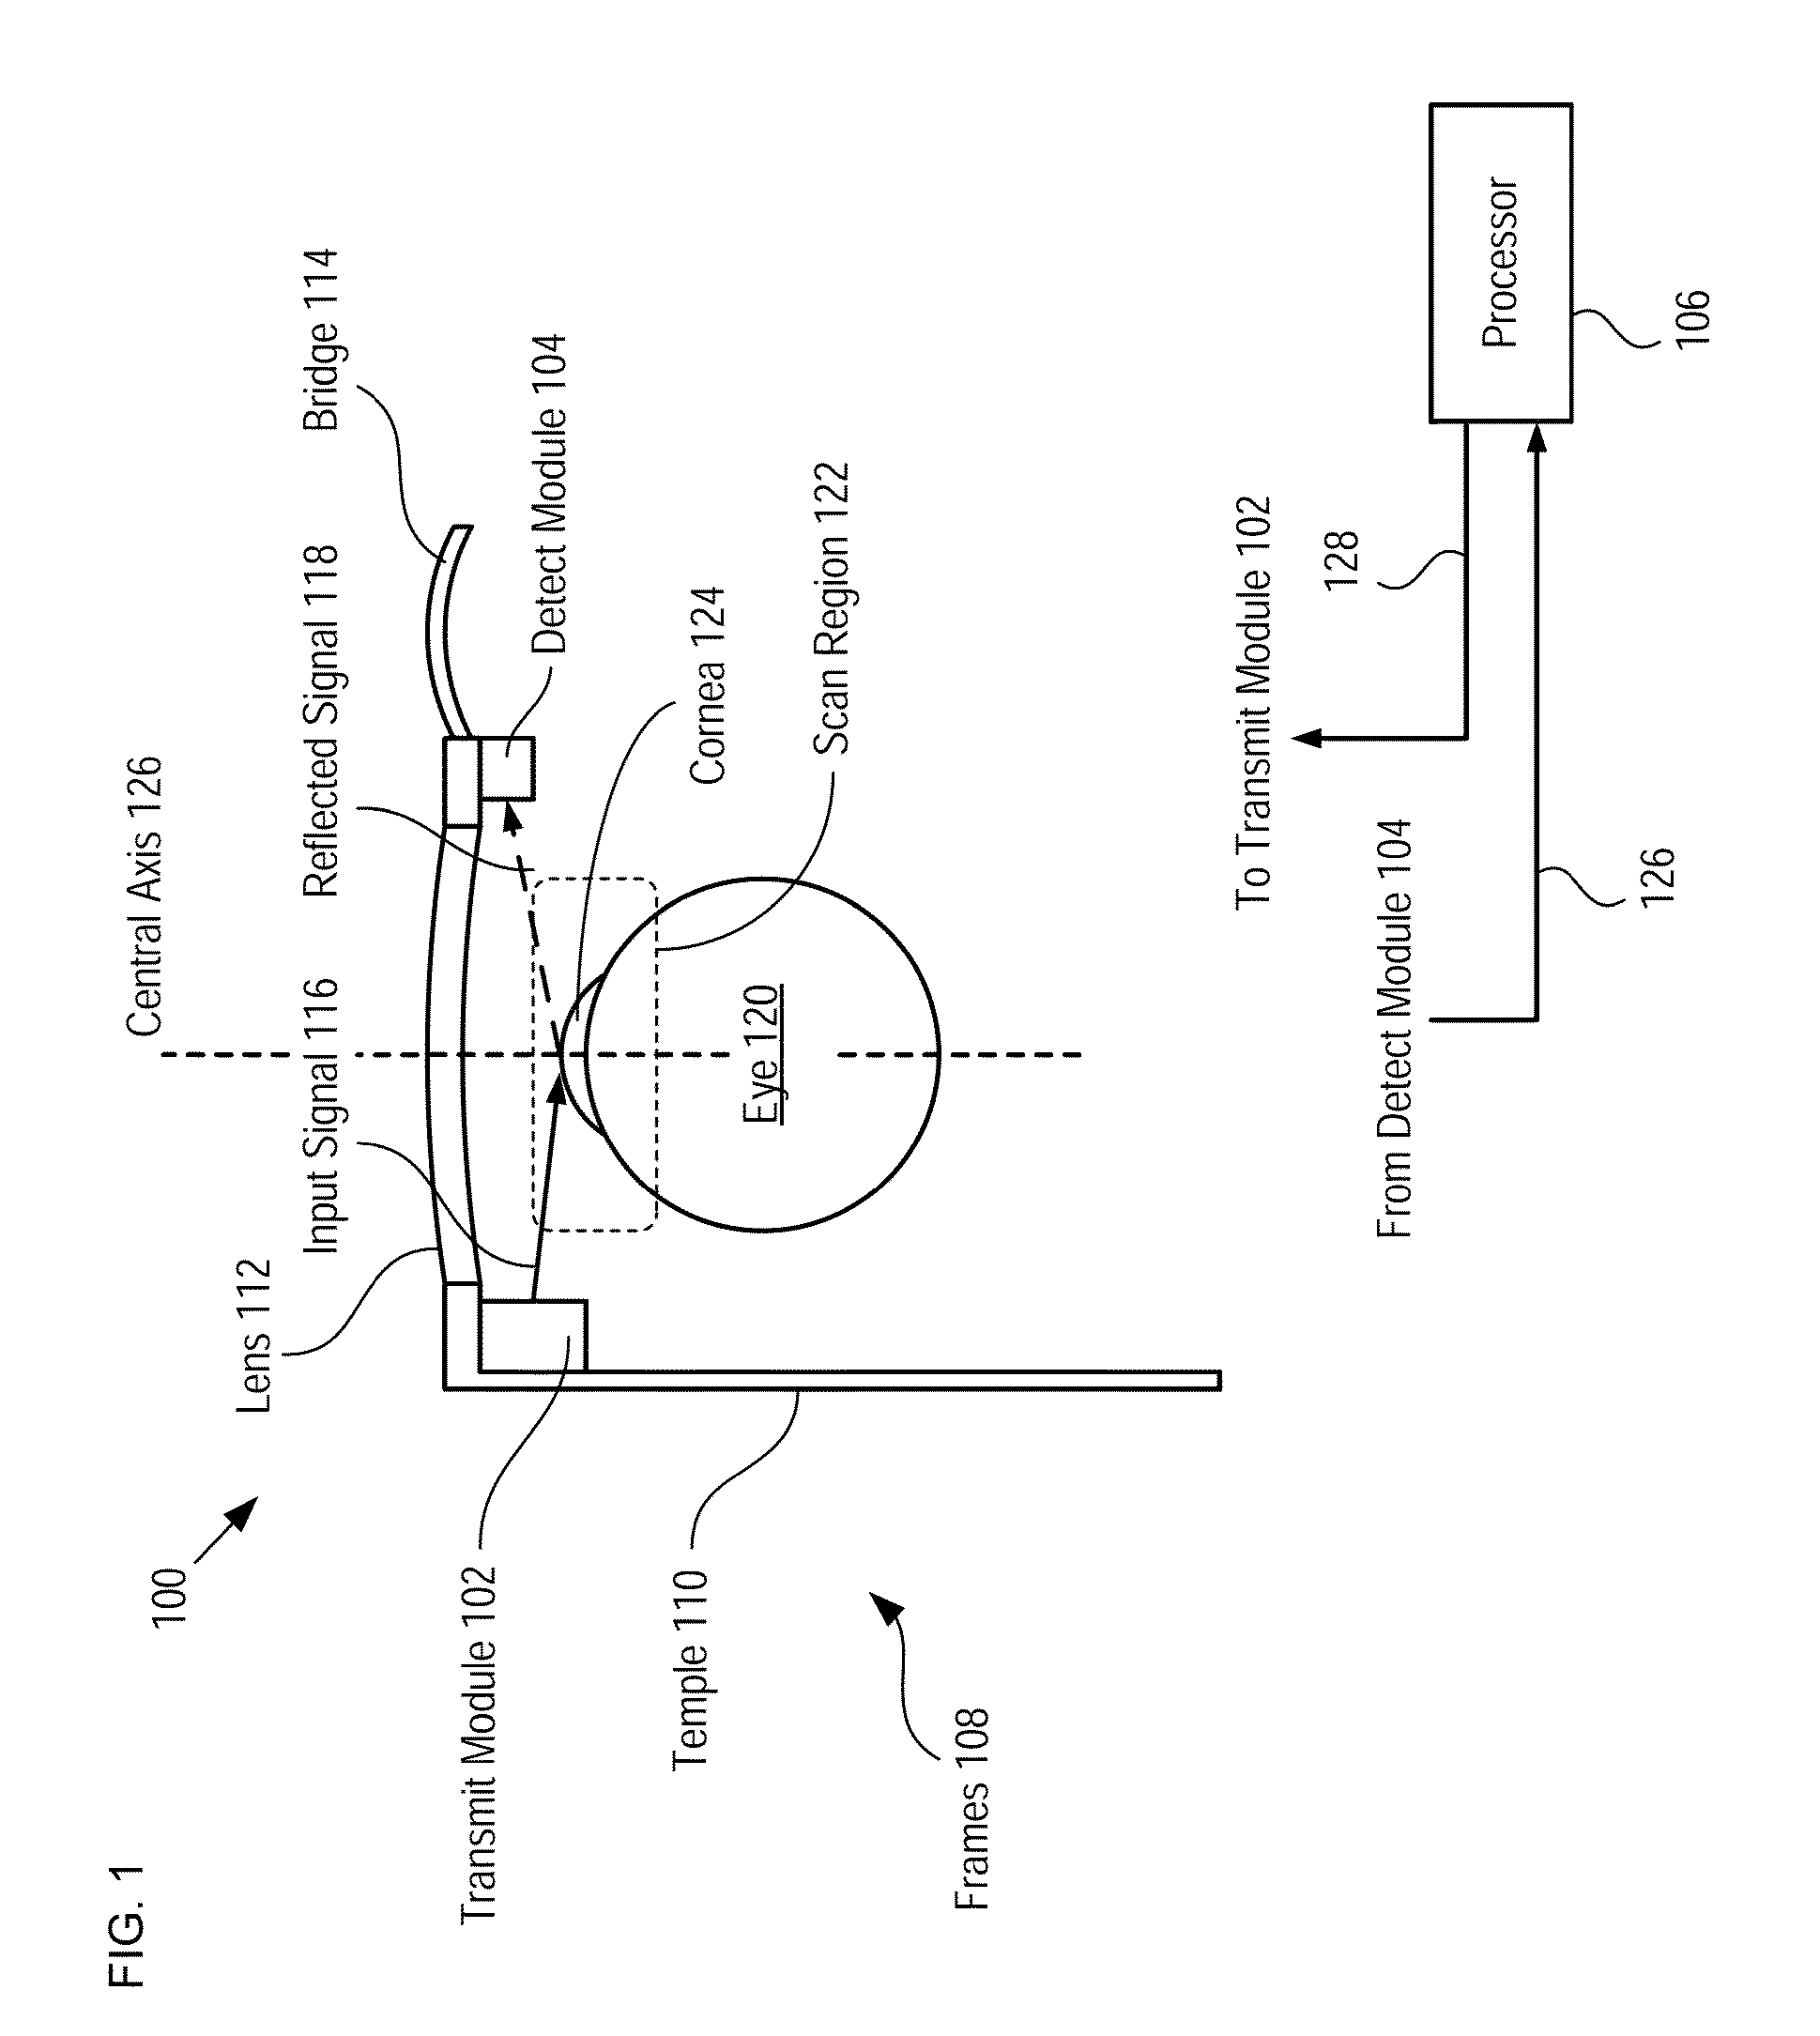 Eye-Tracking System and Method Therefor